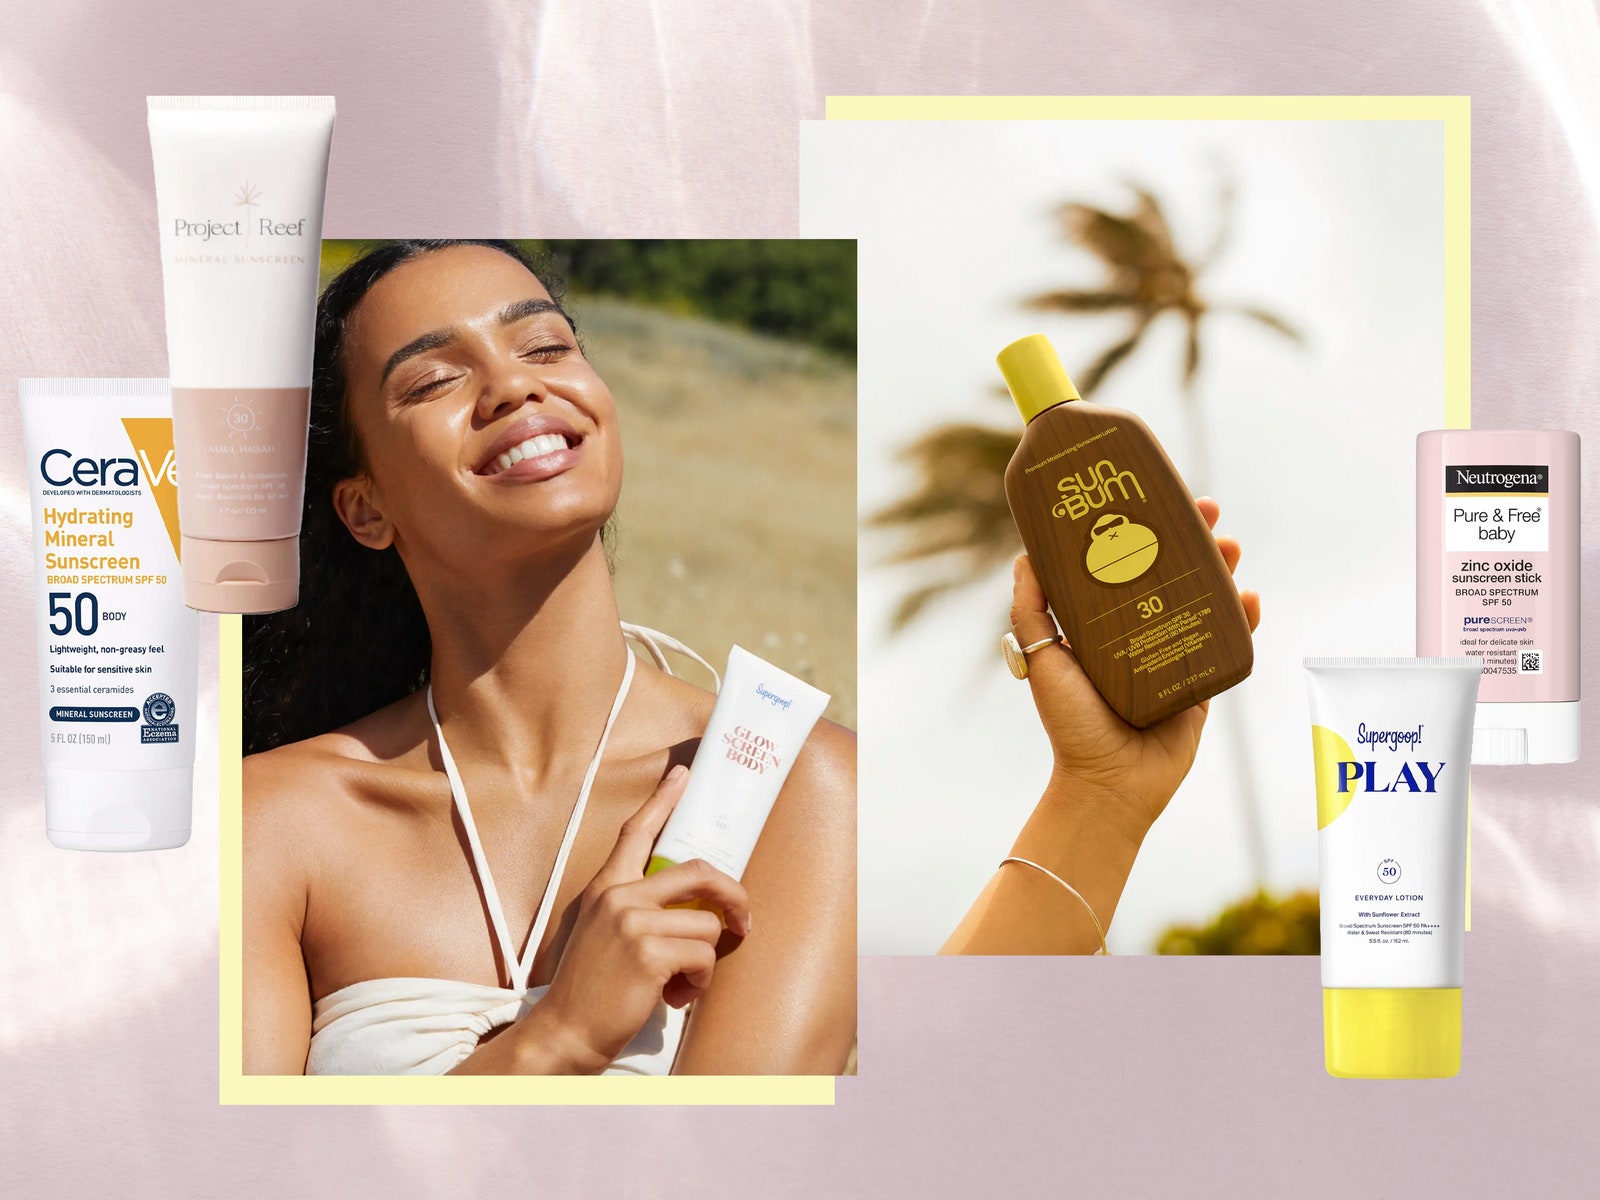 The Best Body Sunscreen for Every Skin Type